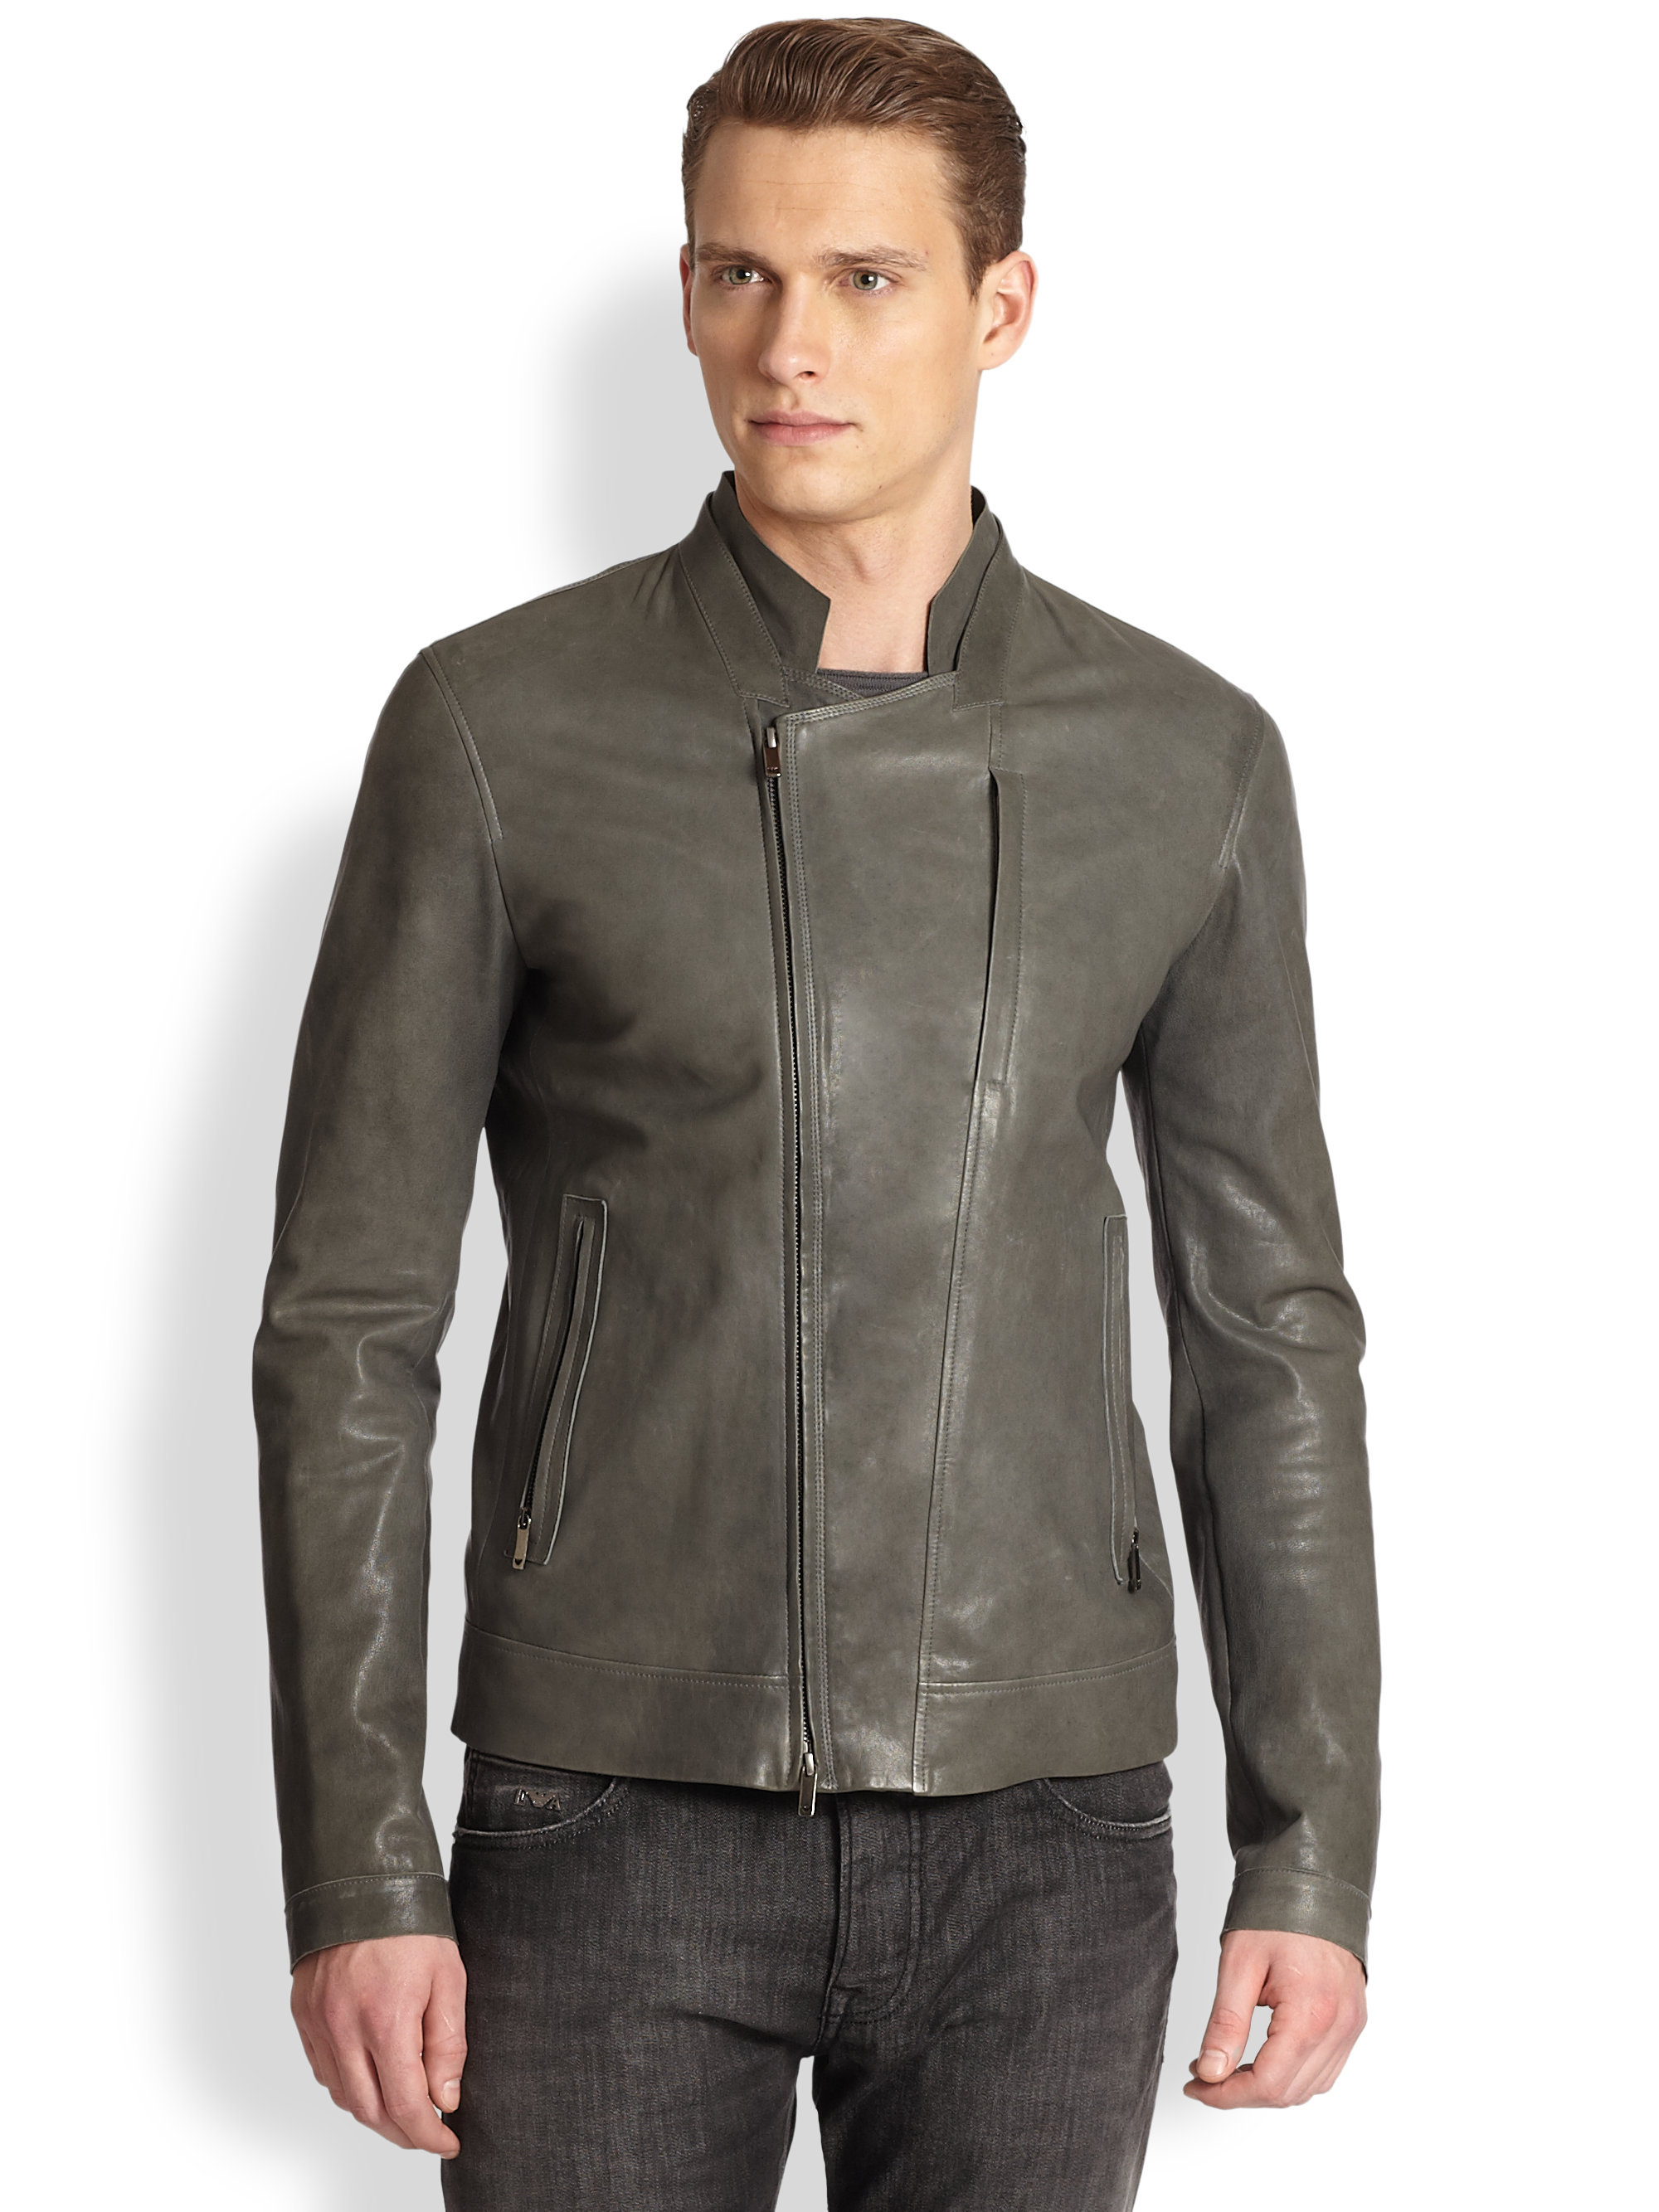 Lyst - Emporio Armani Asymmetrical Leather Jacket in Gray for Men